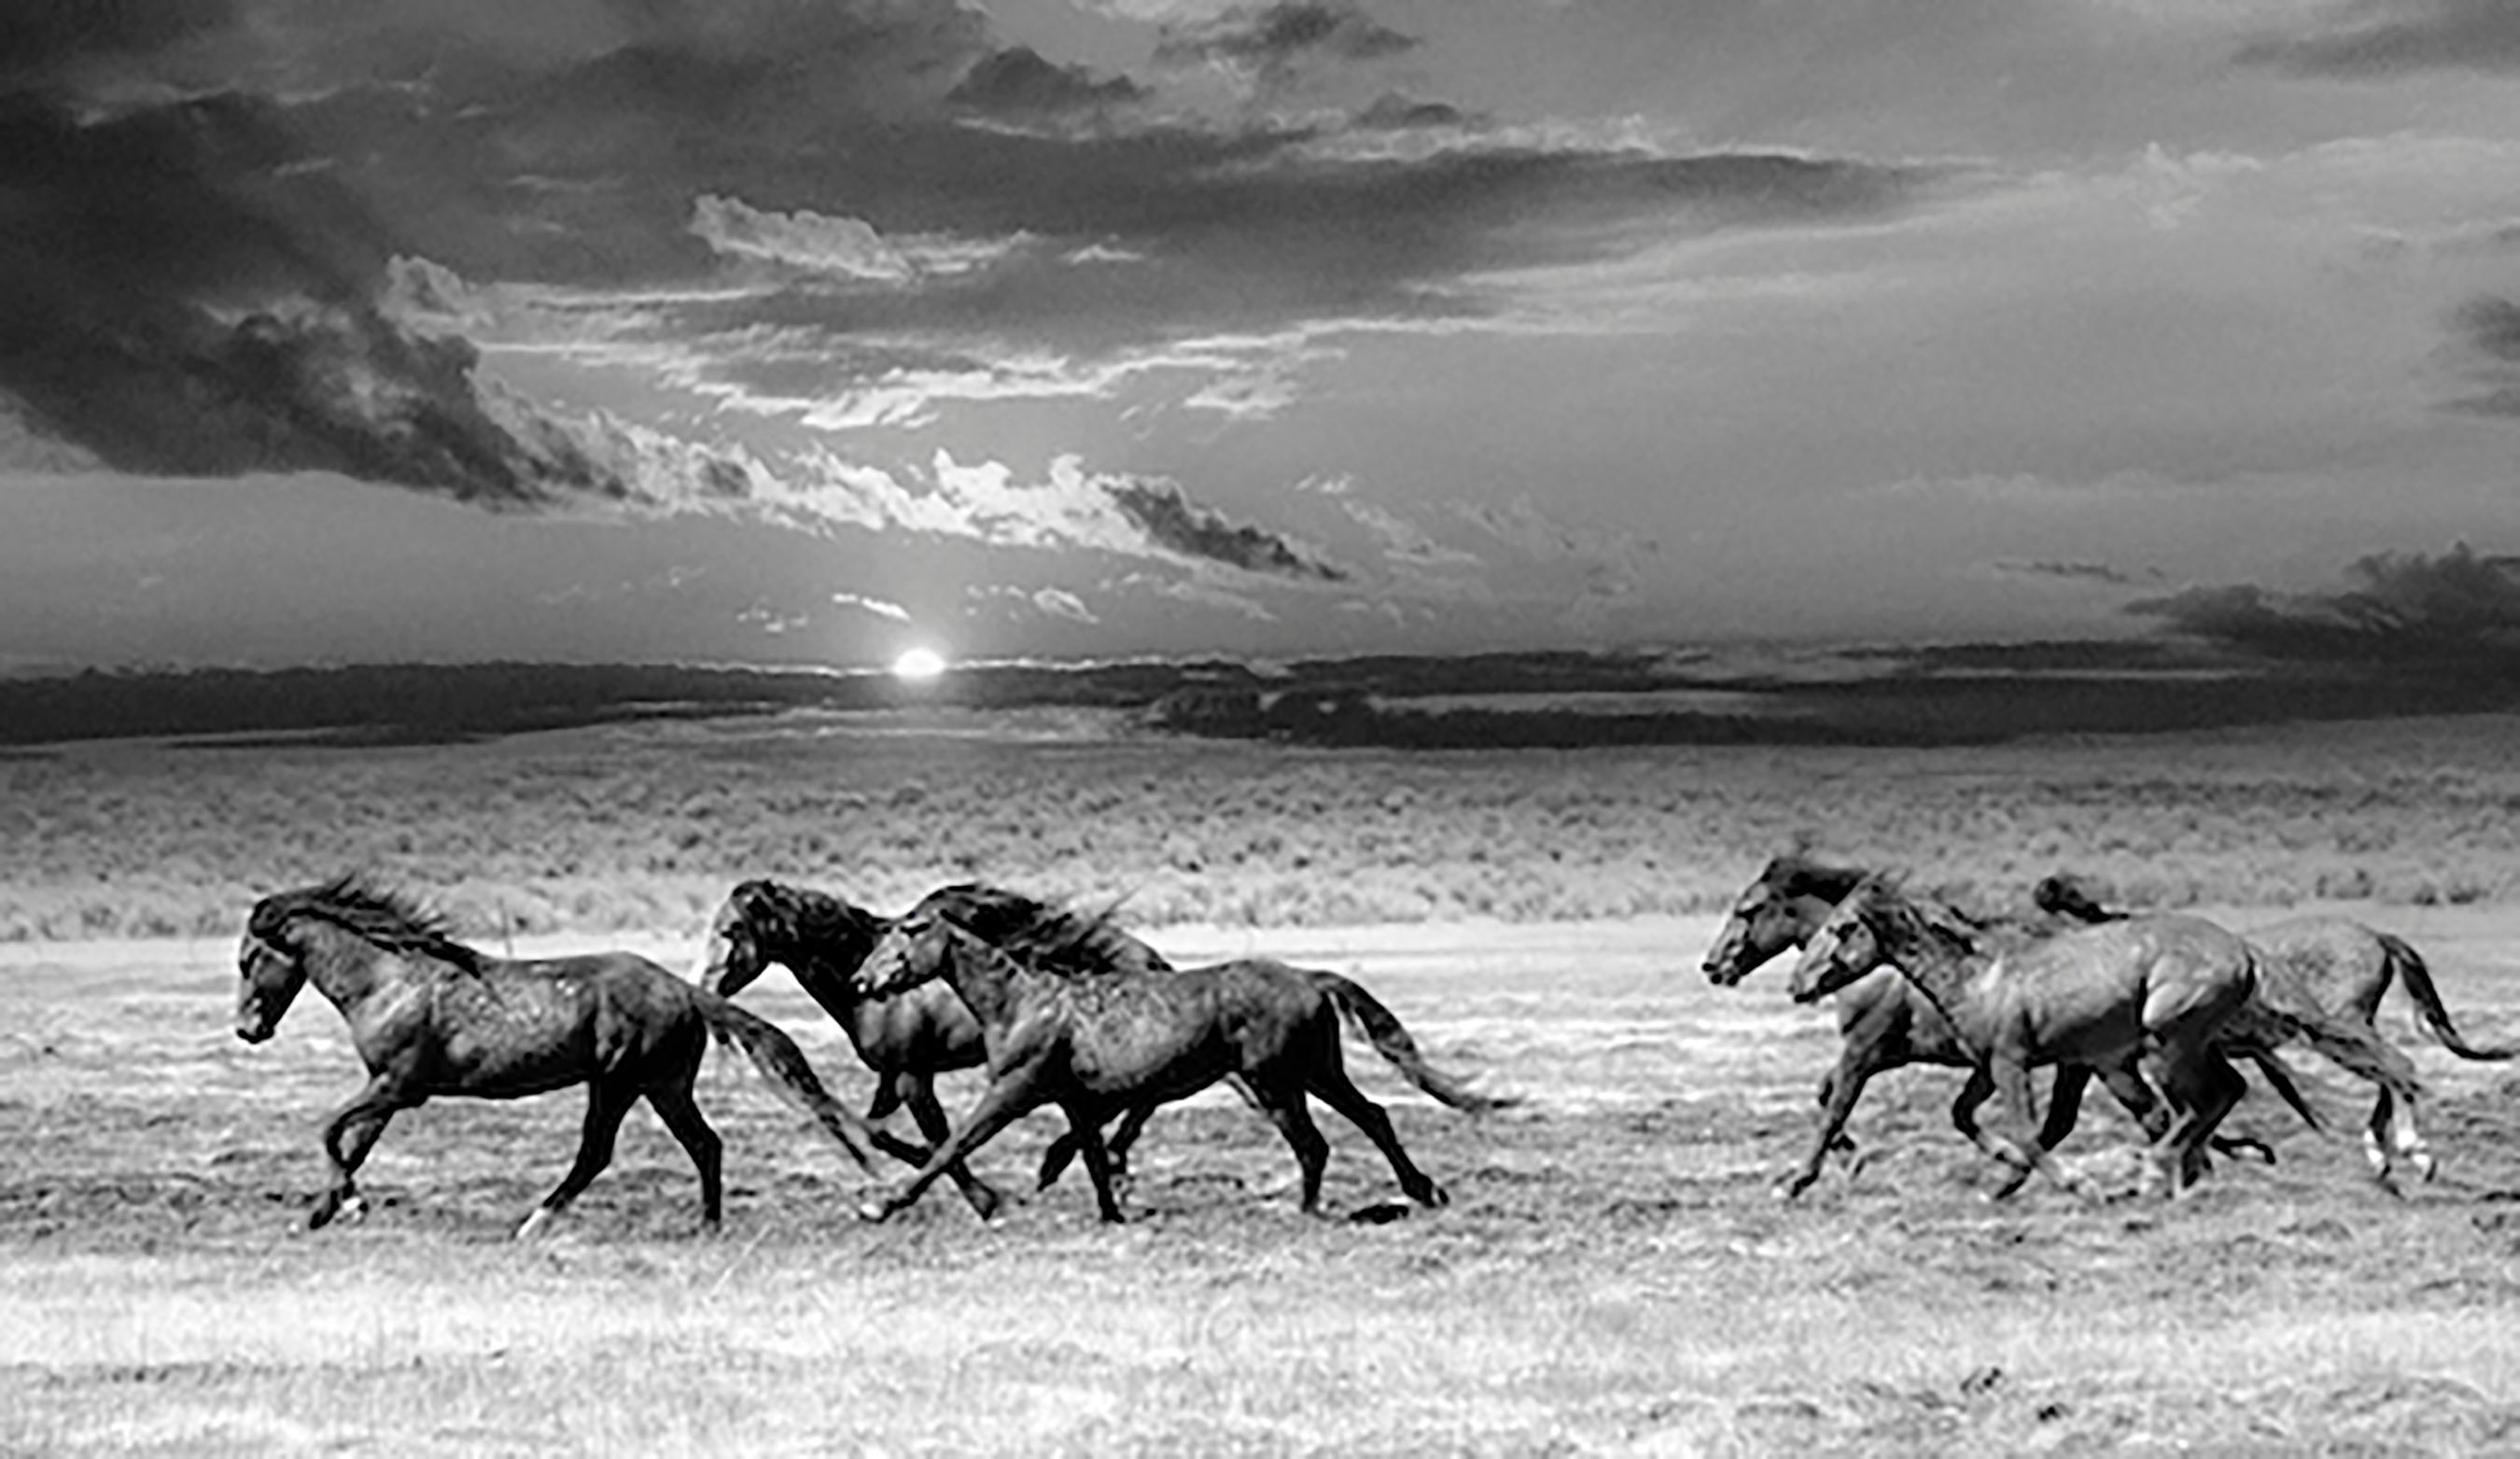 Chasing the Light 60x40- Contemporary Black and White Photography of Wild Horses - Gray Animal Print by Shane Russeck